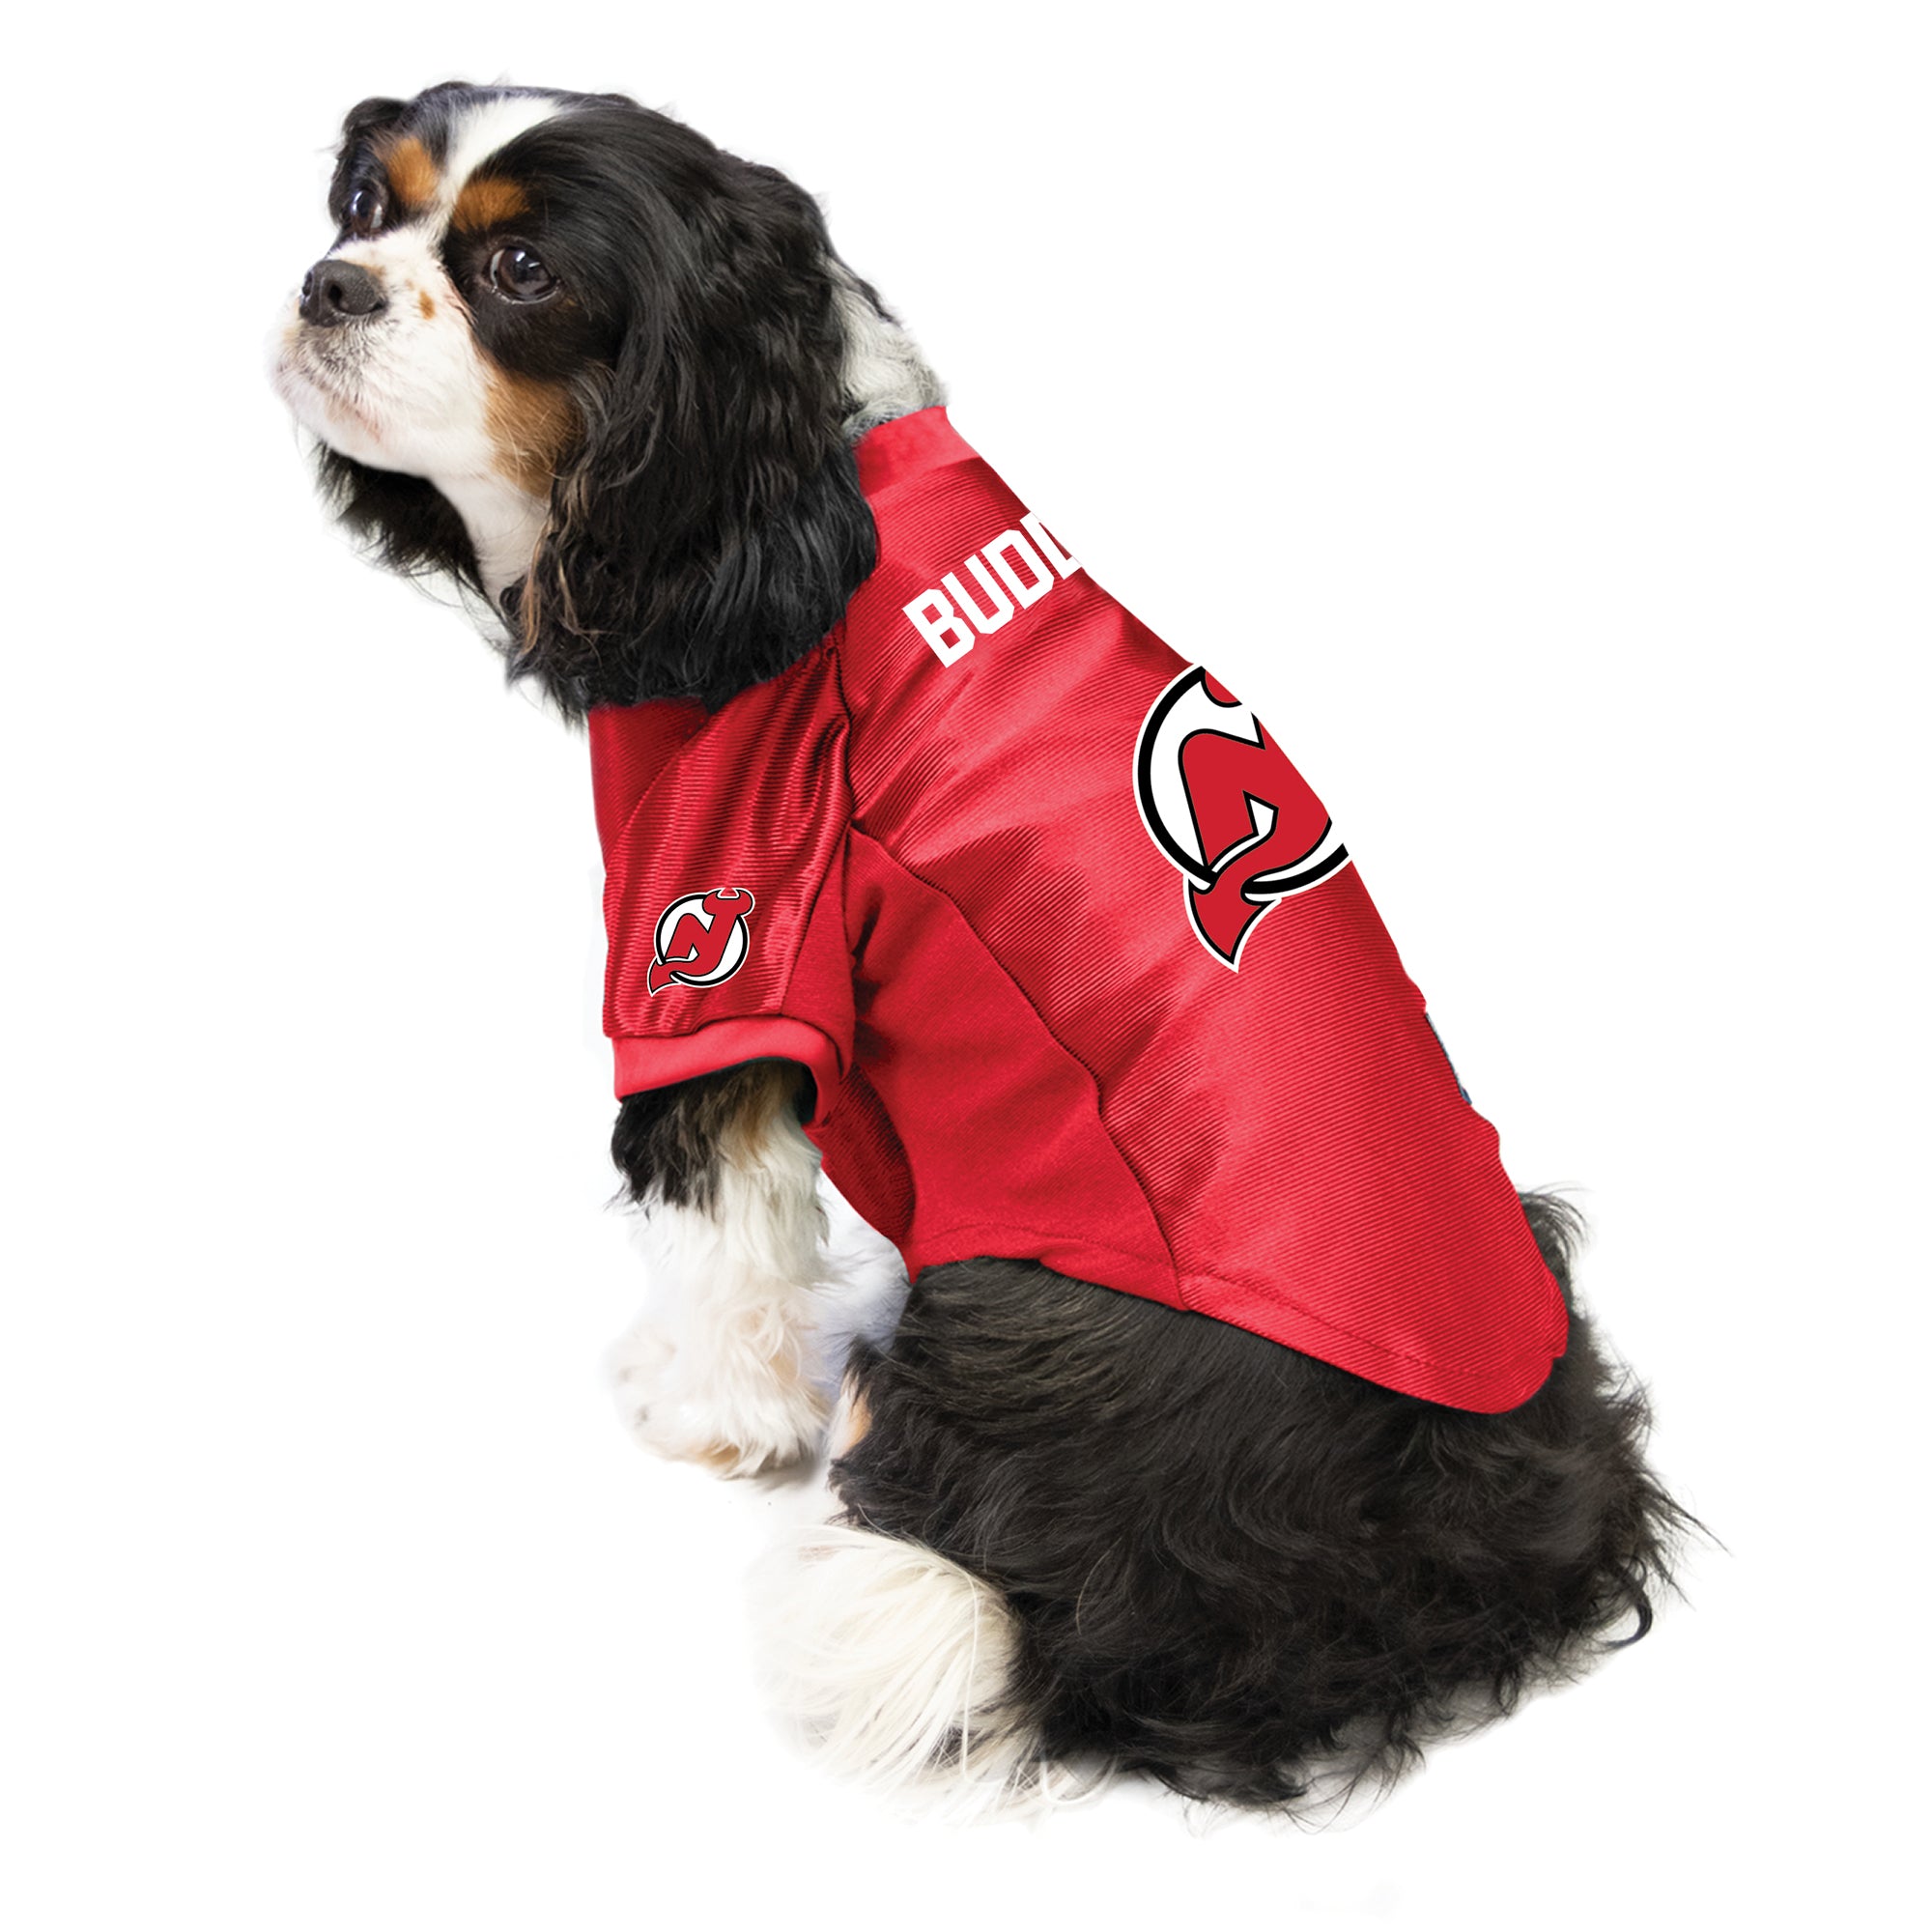 NEW! NEW JERSEY DEVILS DOG CAT PREMIUM JERSEY w/NAME TAG LICENSED LARGE